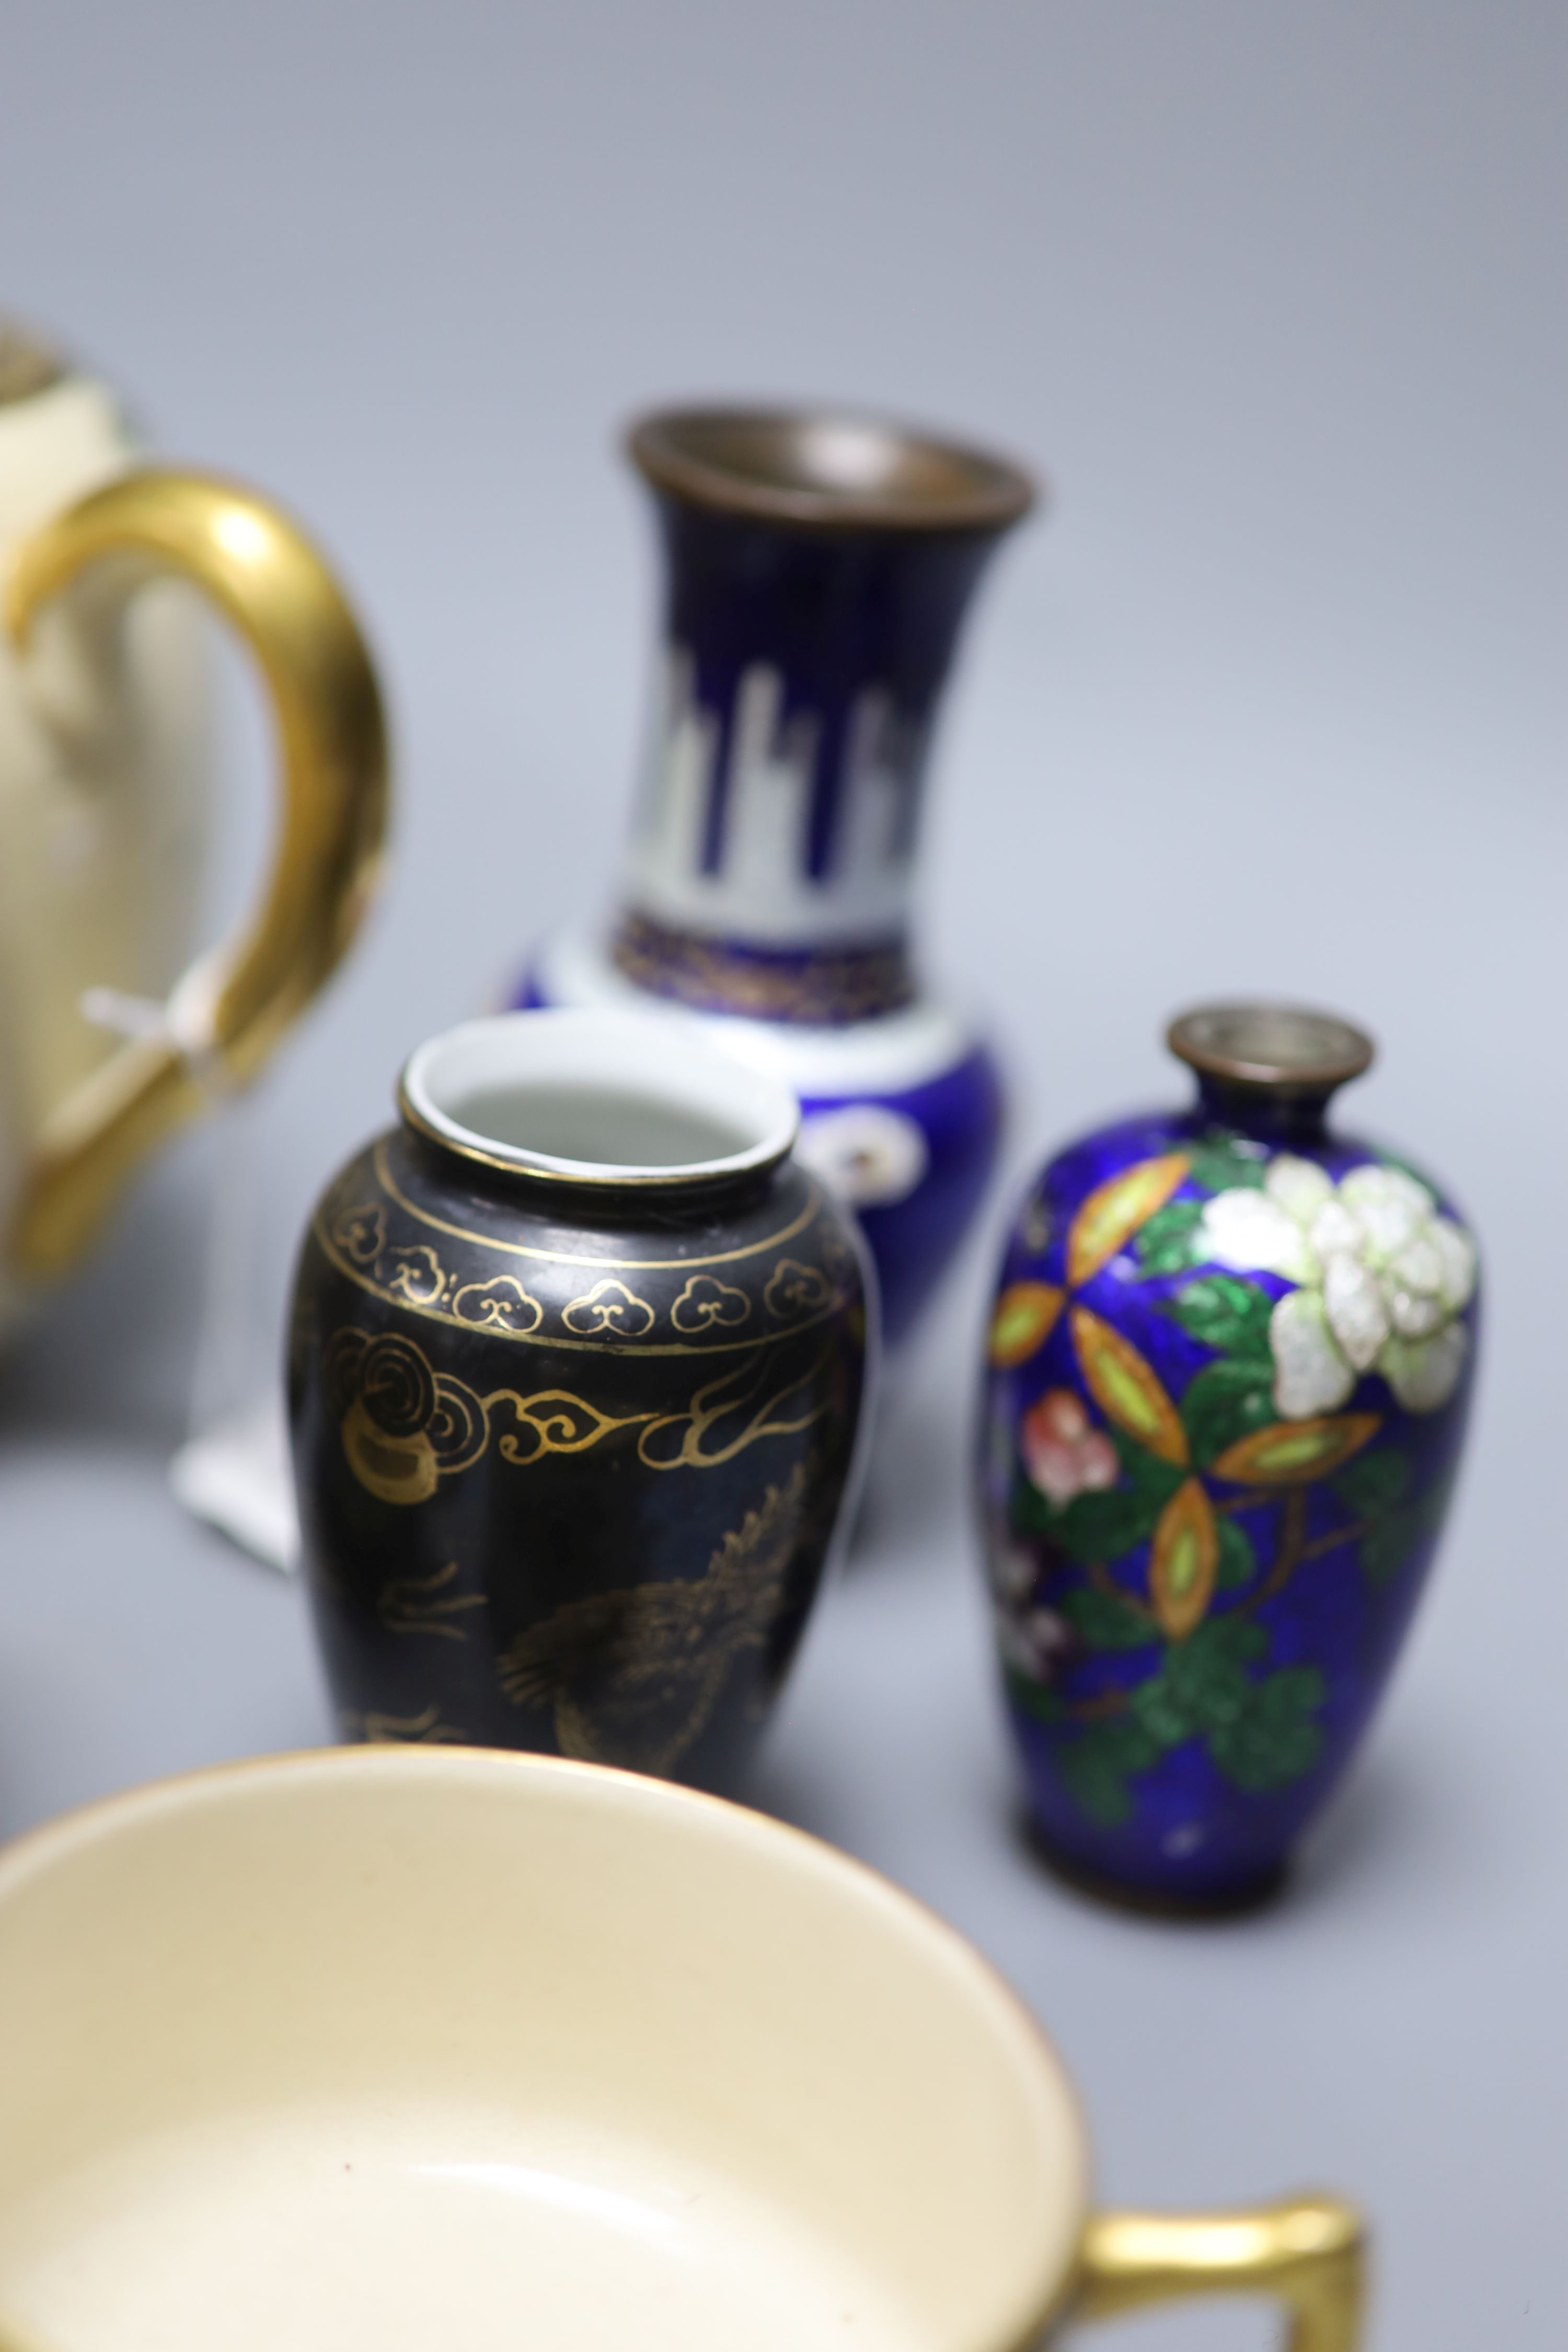 A group of Japanese cloisonne and satsuma wares